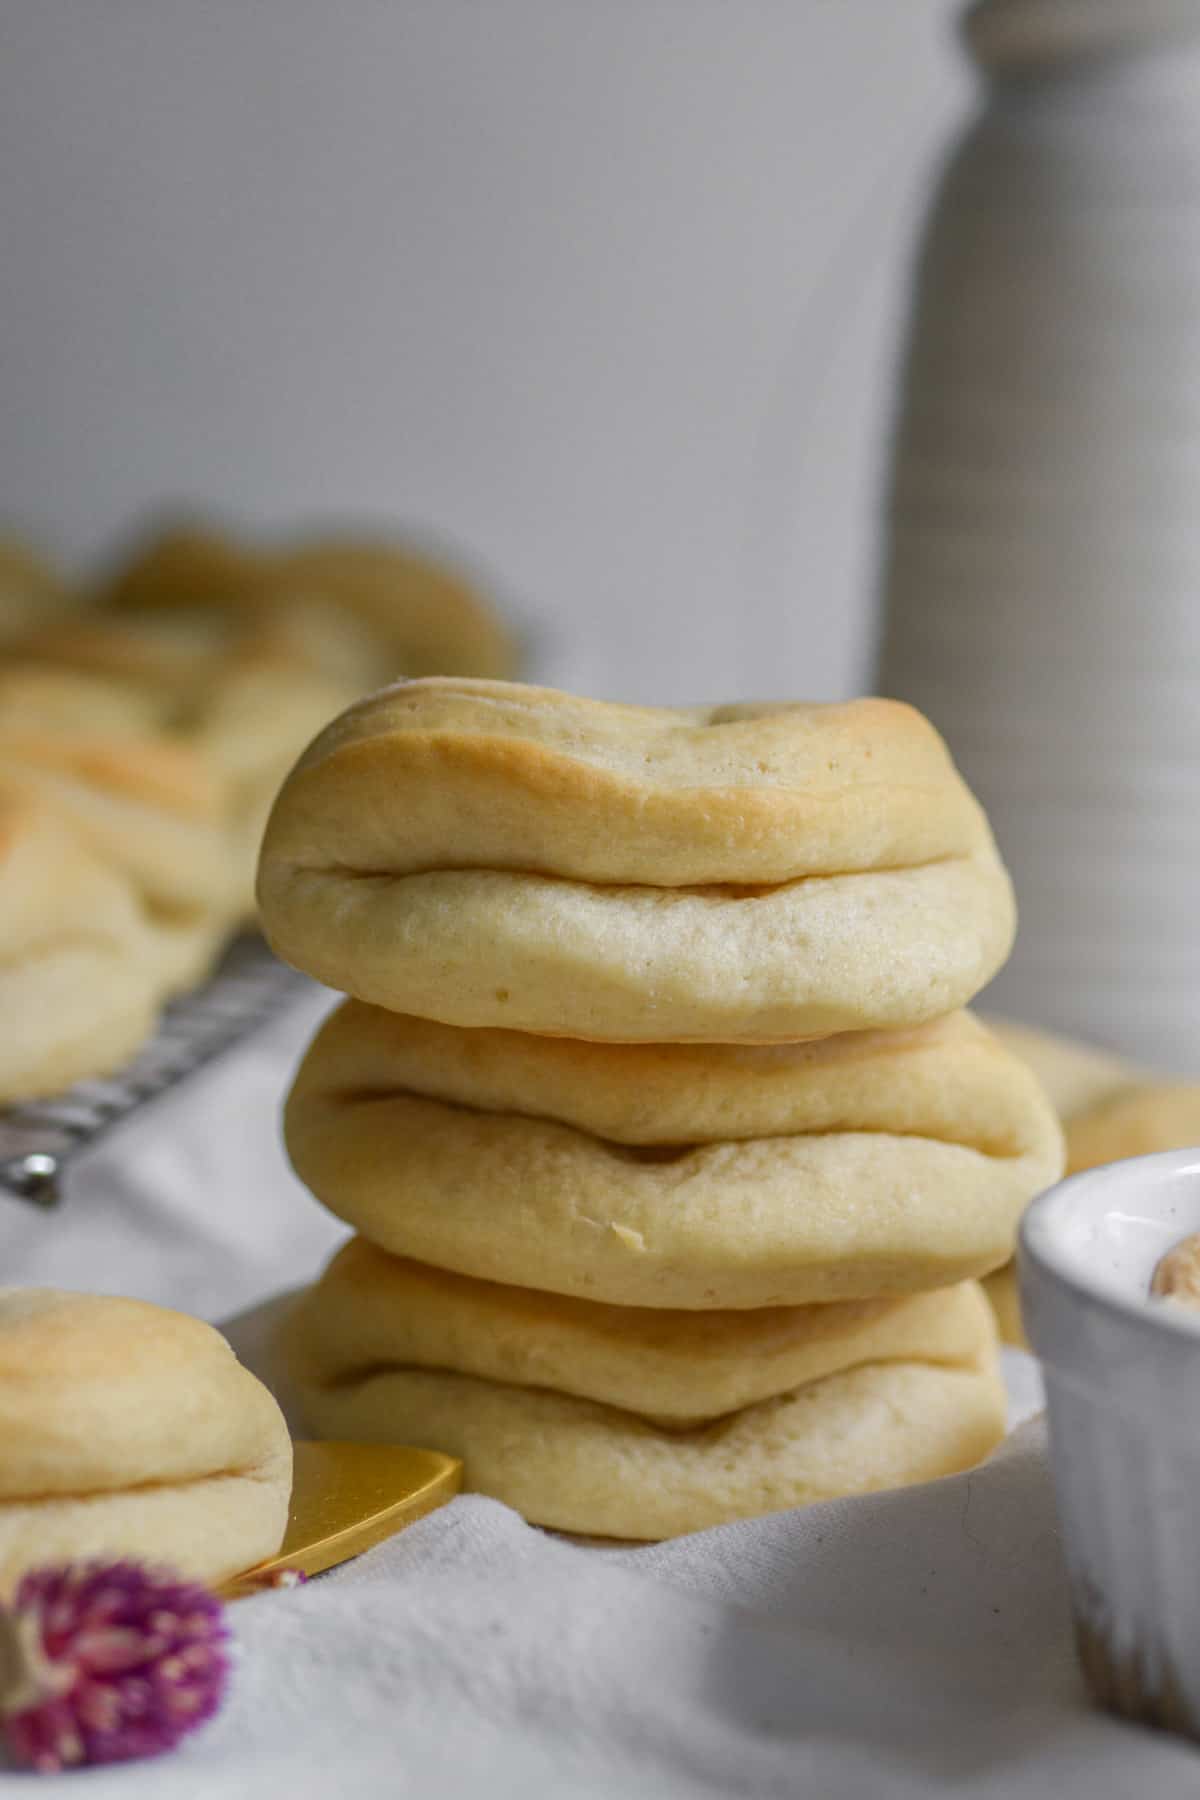 A stack of three Vegan Parker House Dinner Rolls on a white cloth